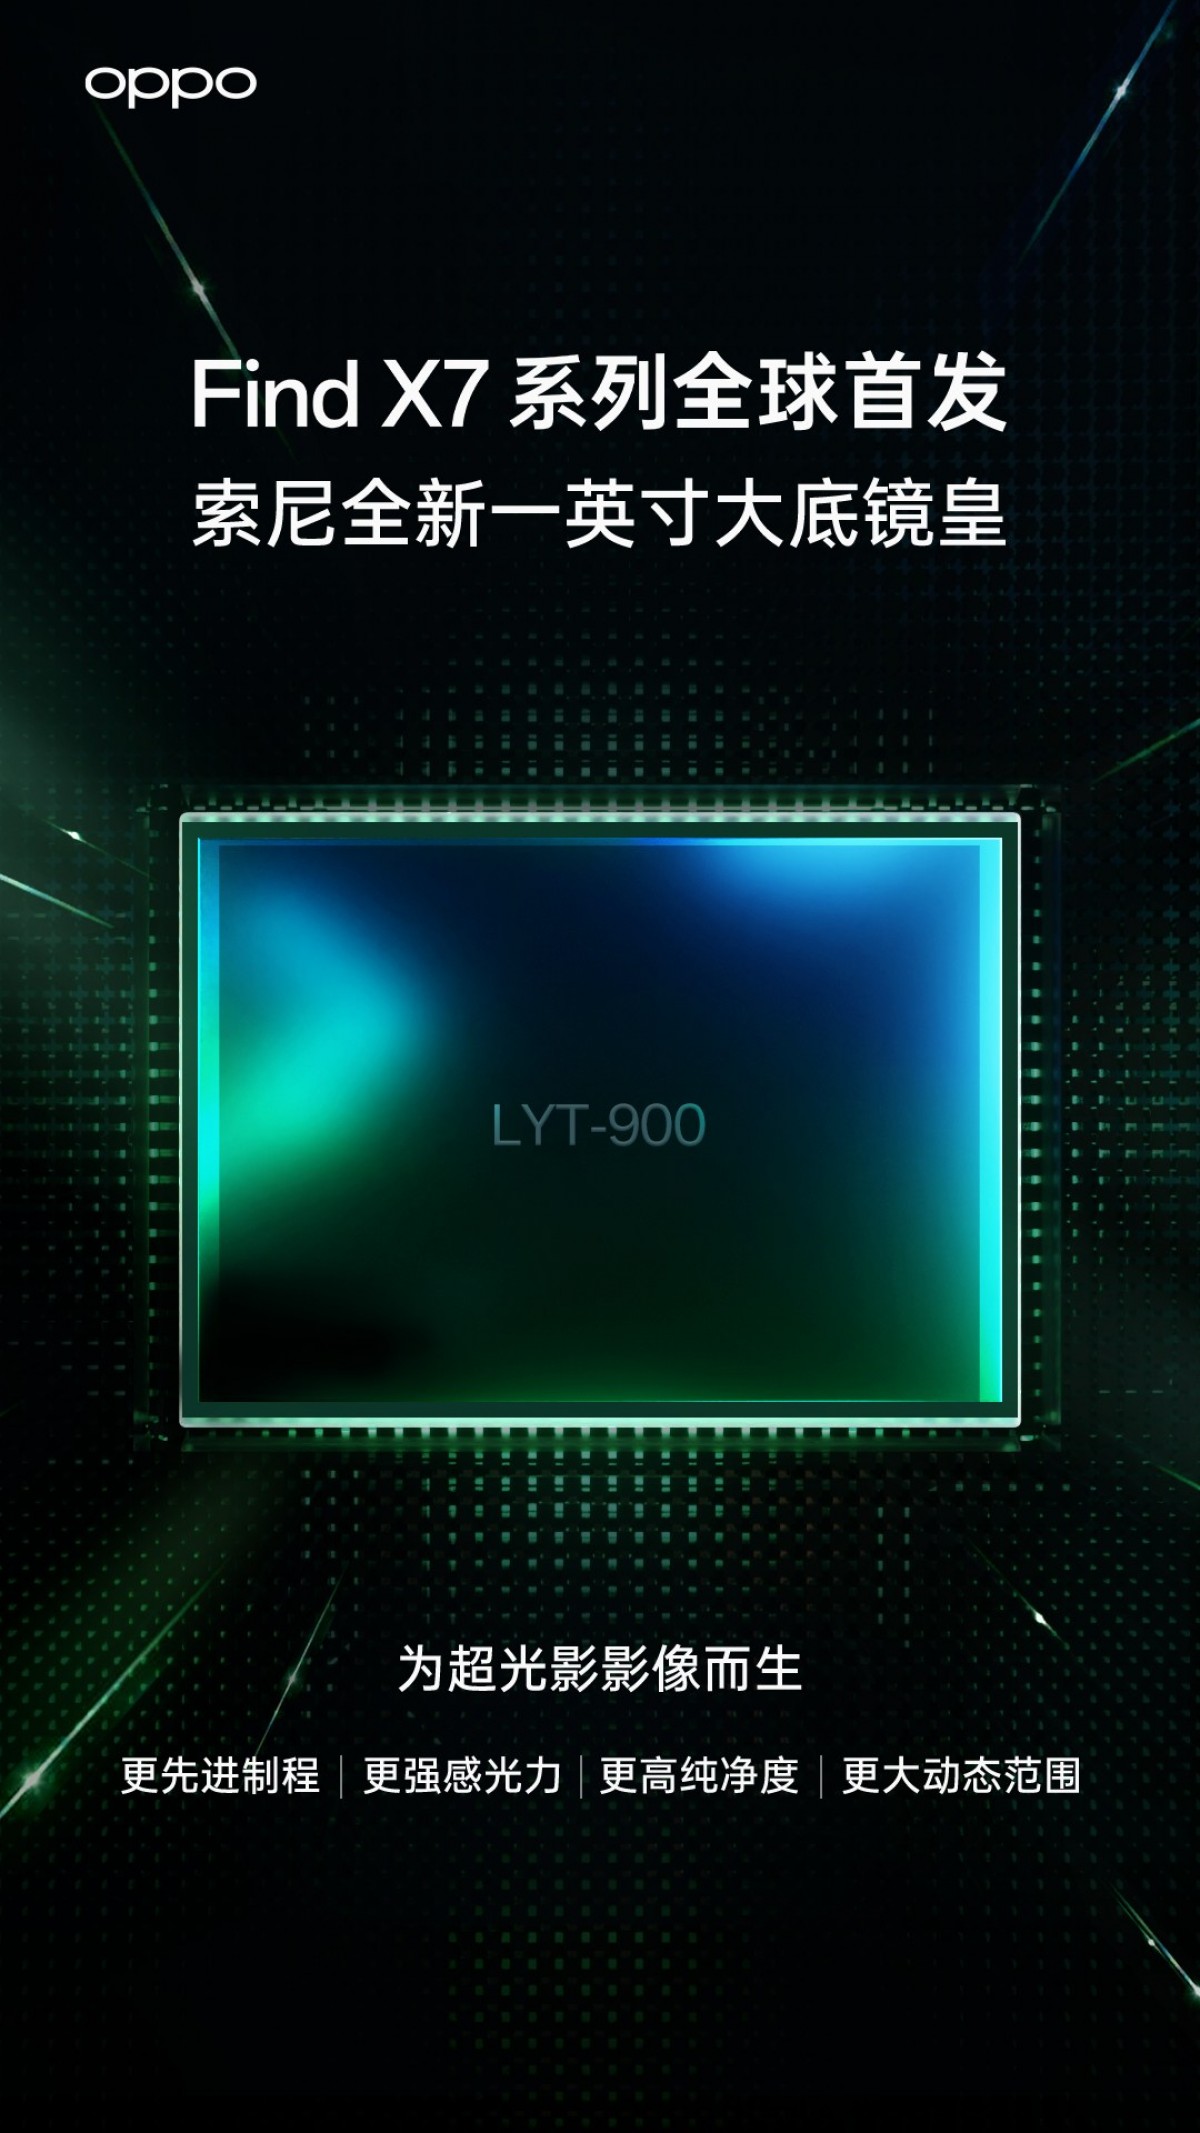 Oppo confirms the 1-inch Sony LYT-900 sensor for a Find X7